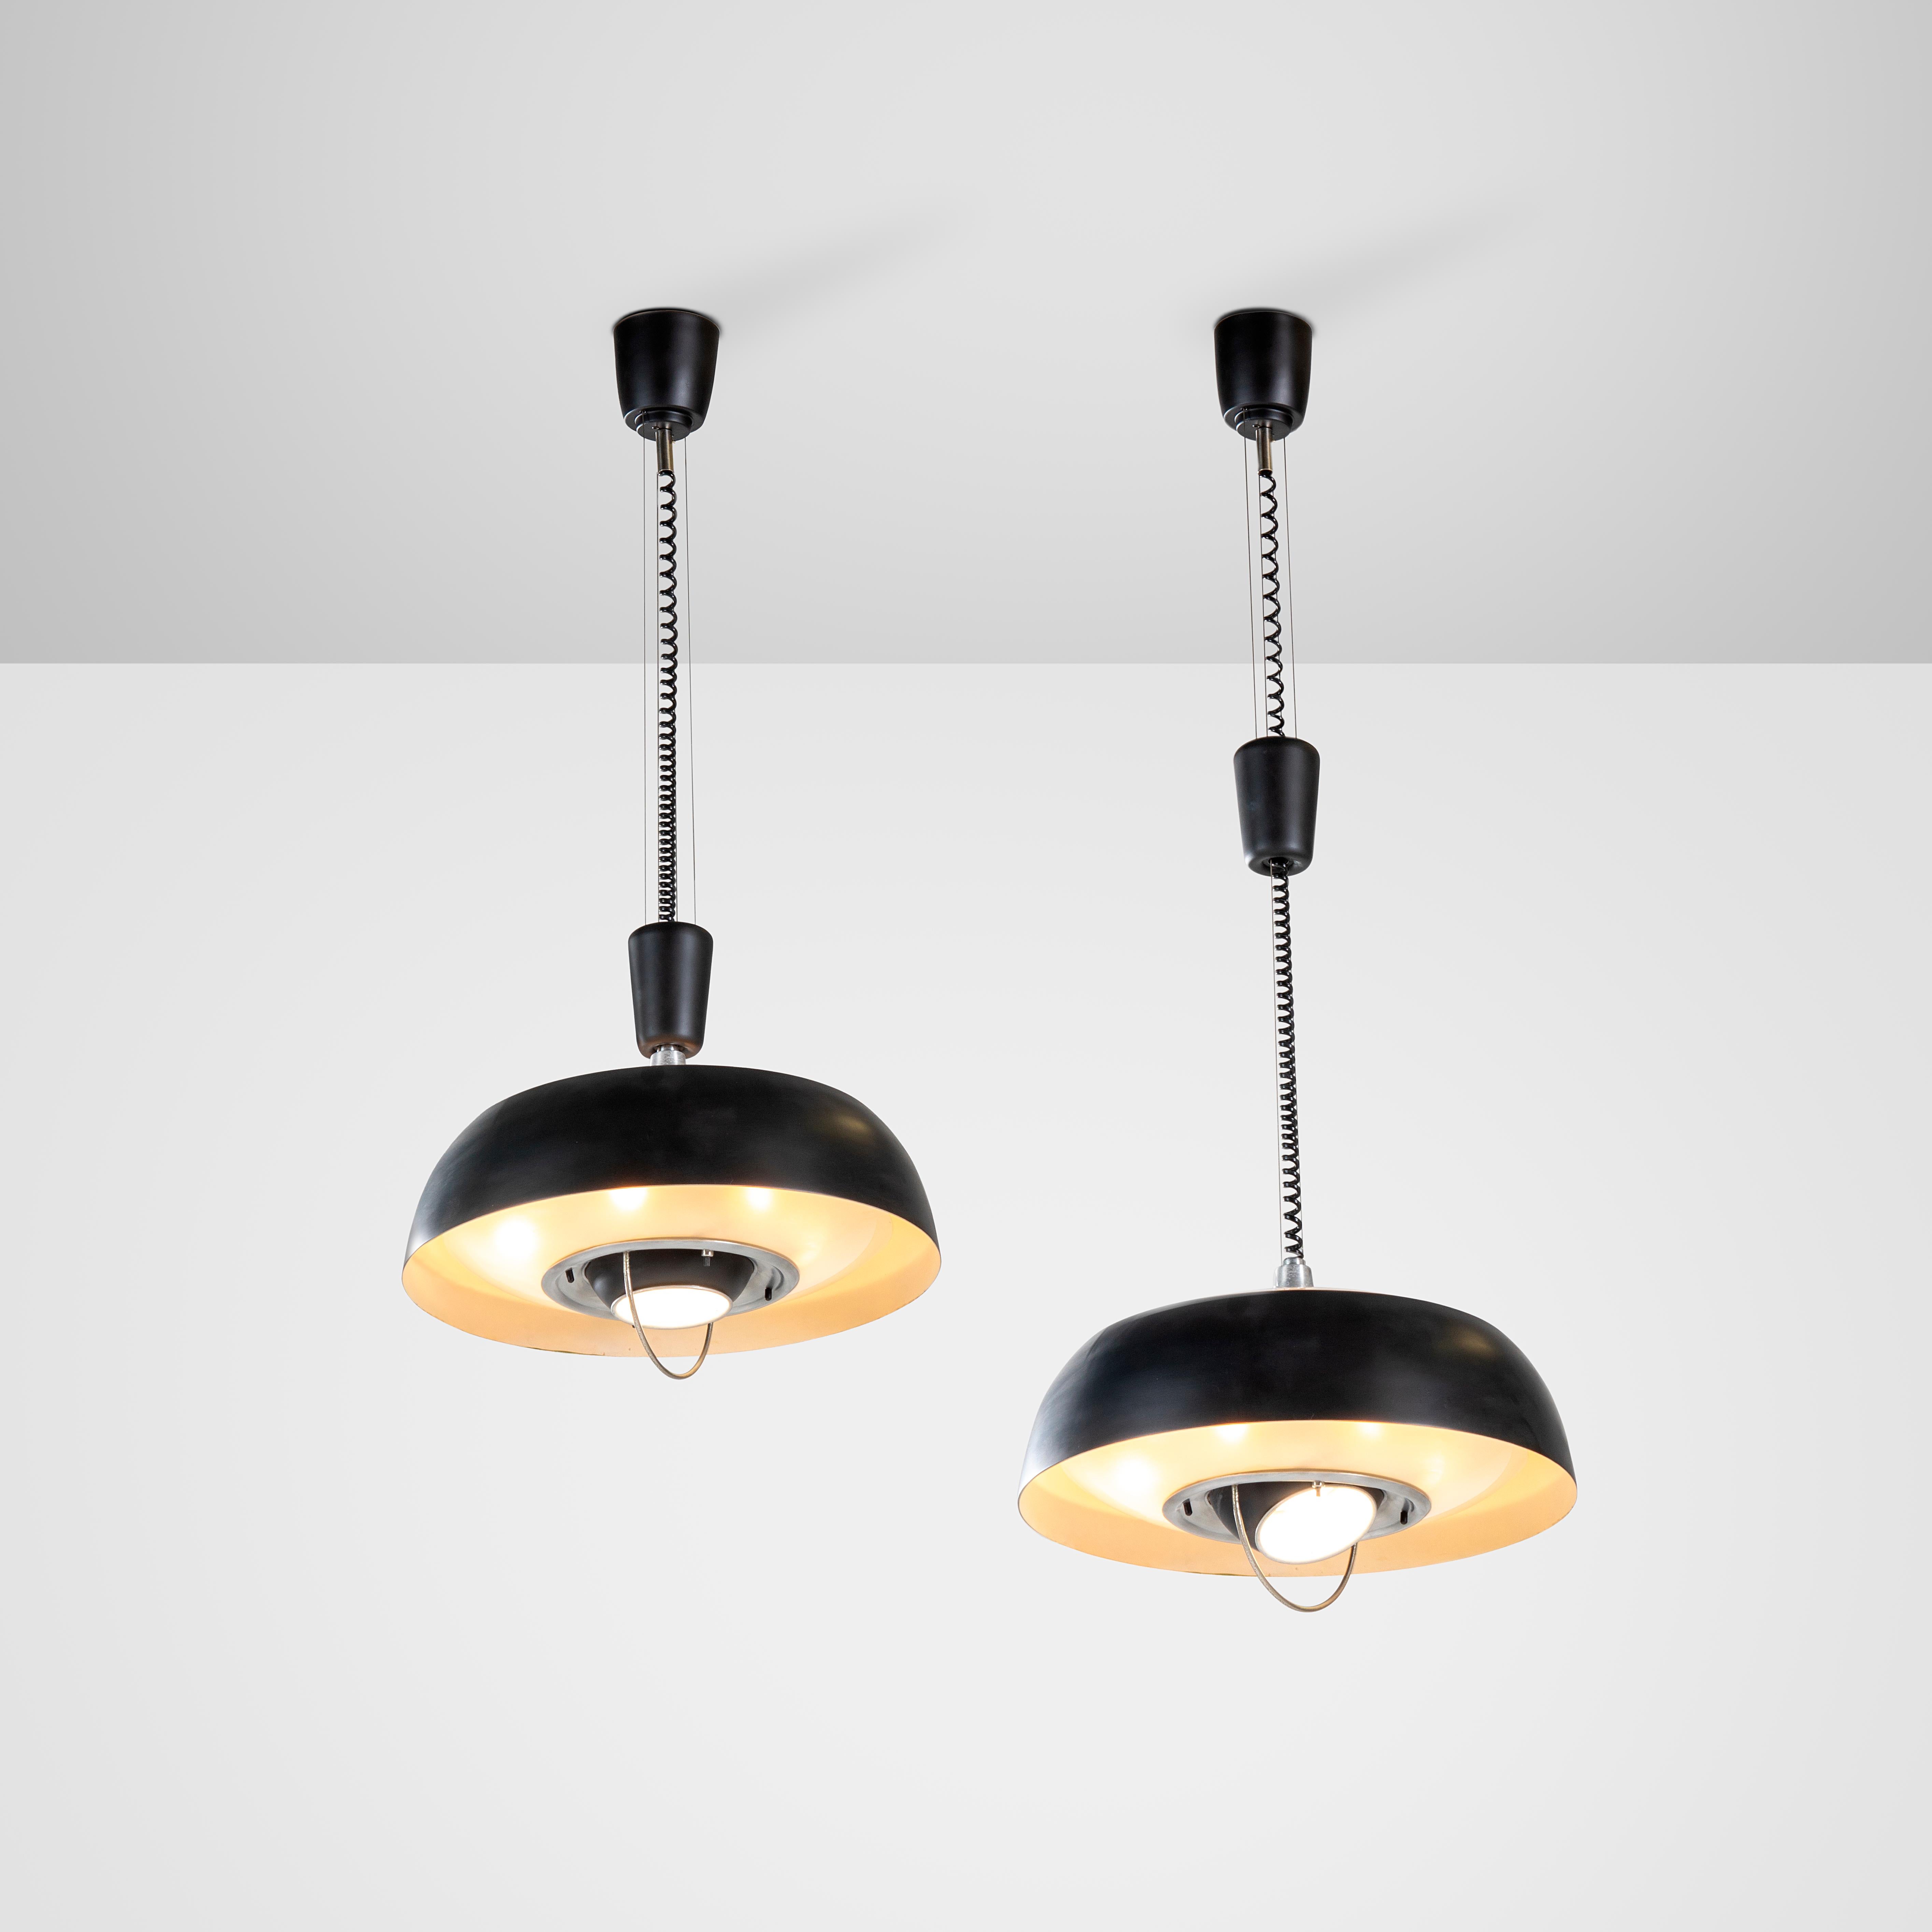 These two chandeliers are counterweight adjustable with a double switch that allows maximum flexibility in lighting more open or more intimate spaces. The double switch located on the diffuser allows independent switch-on of the perimeter band or